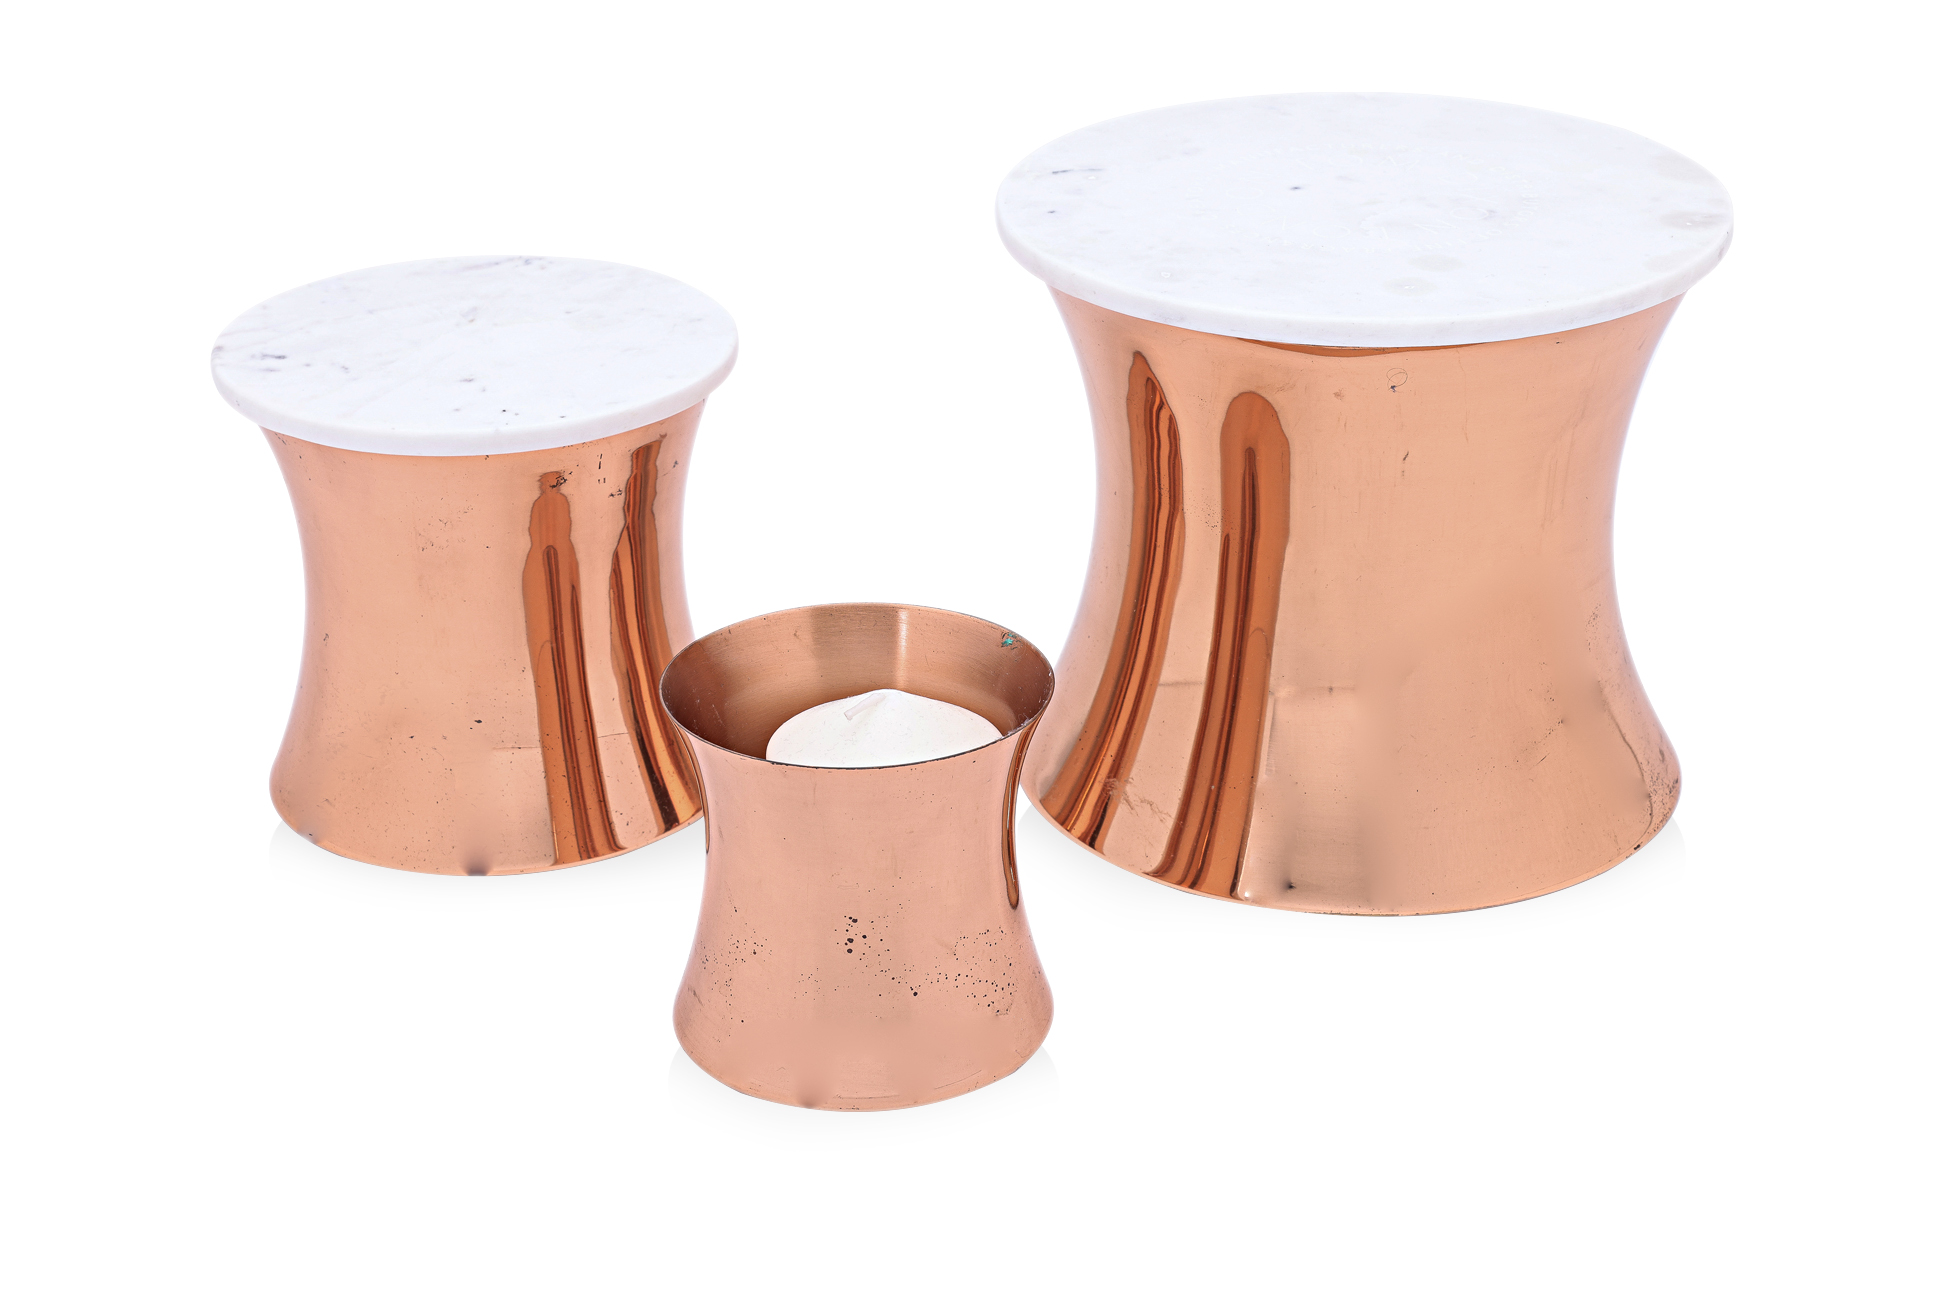 SIX TOM DIXON 'ECLECTIC' AND OTHER COPPER CANDLES - Image 2 of 3